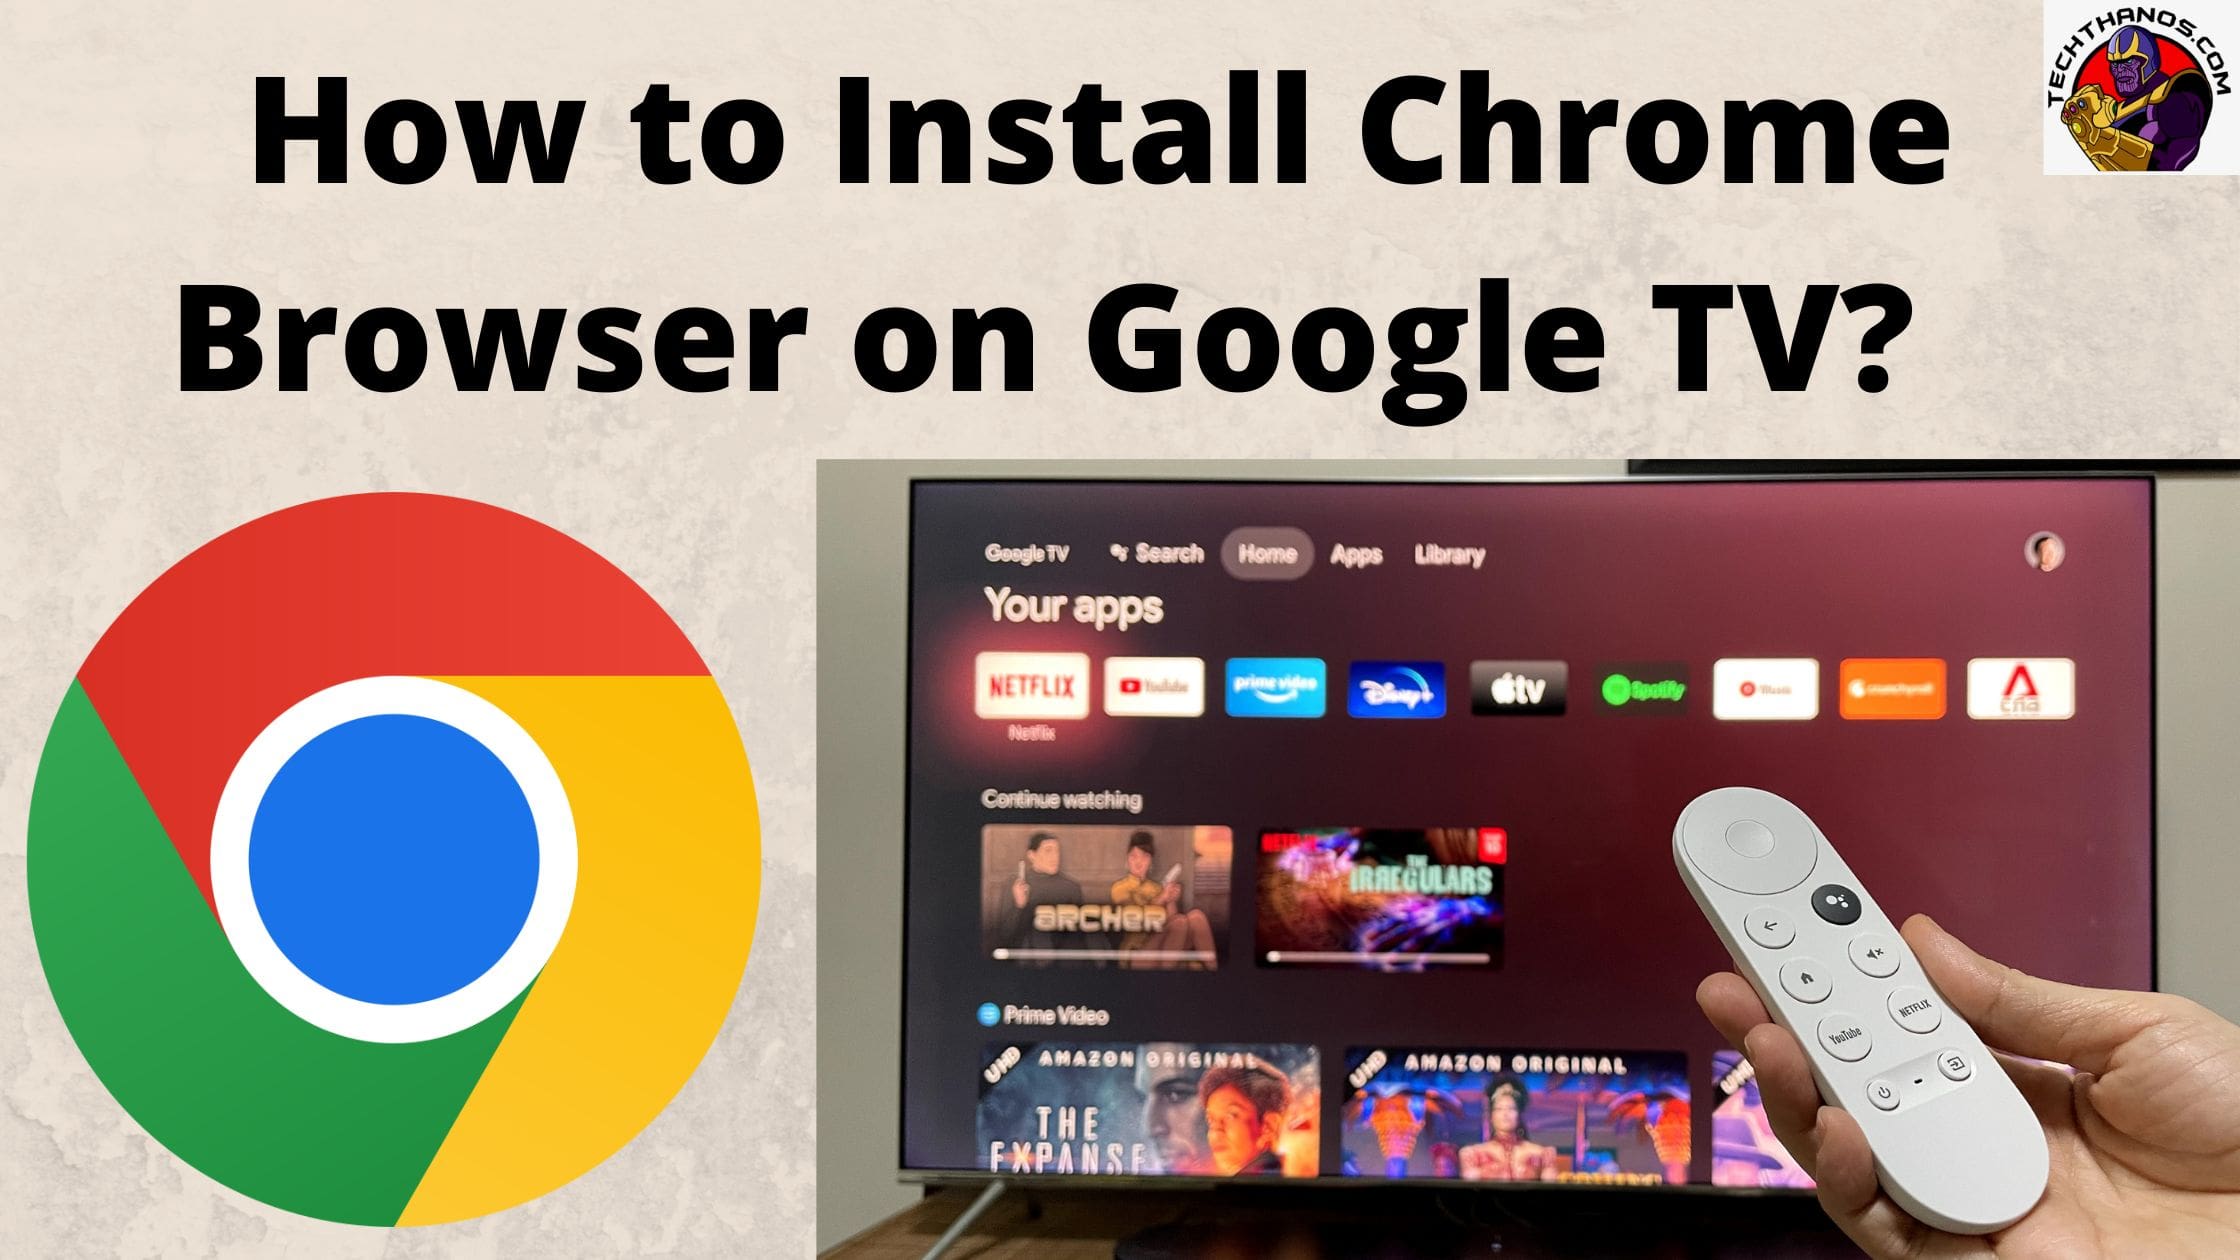 How to Install Chrome Browser on Google TV